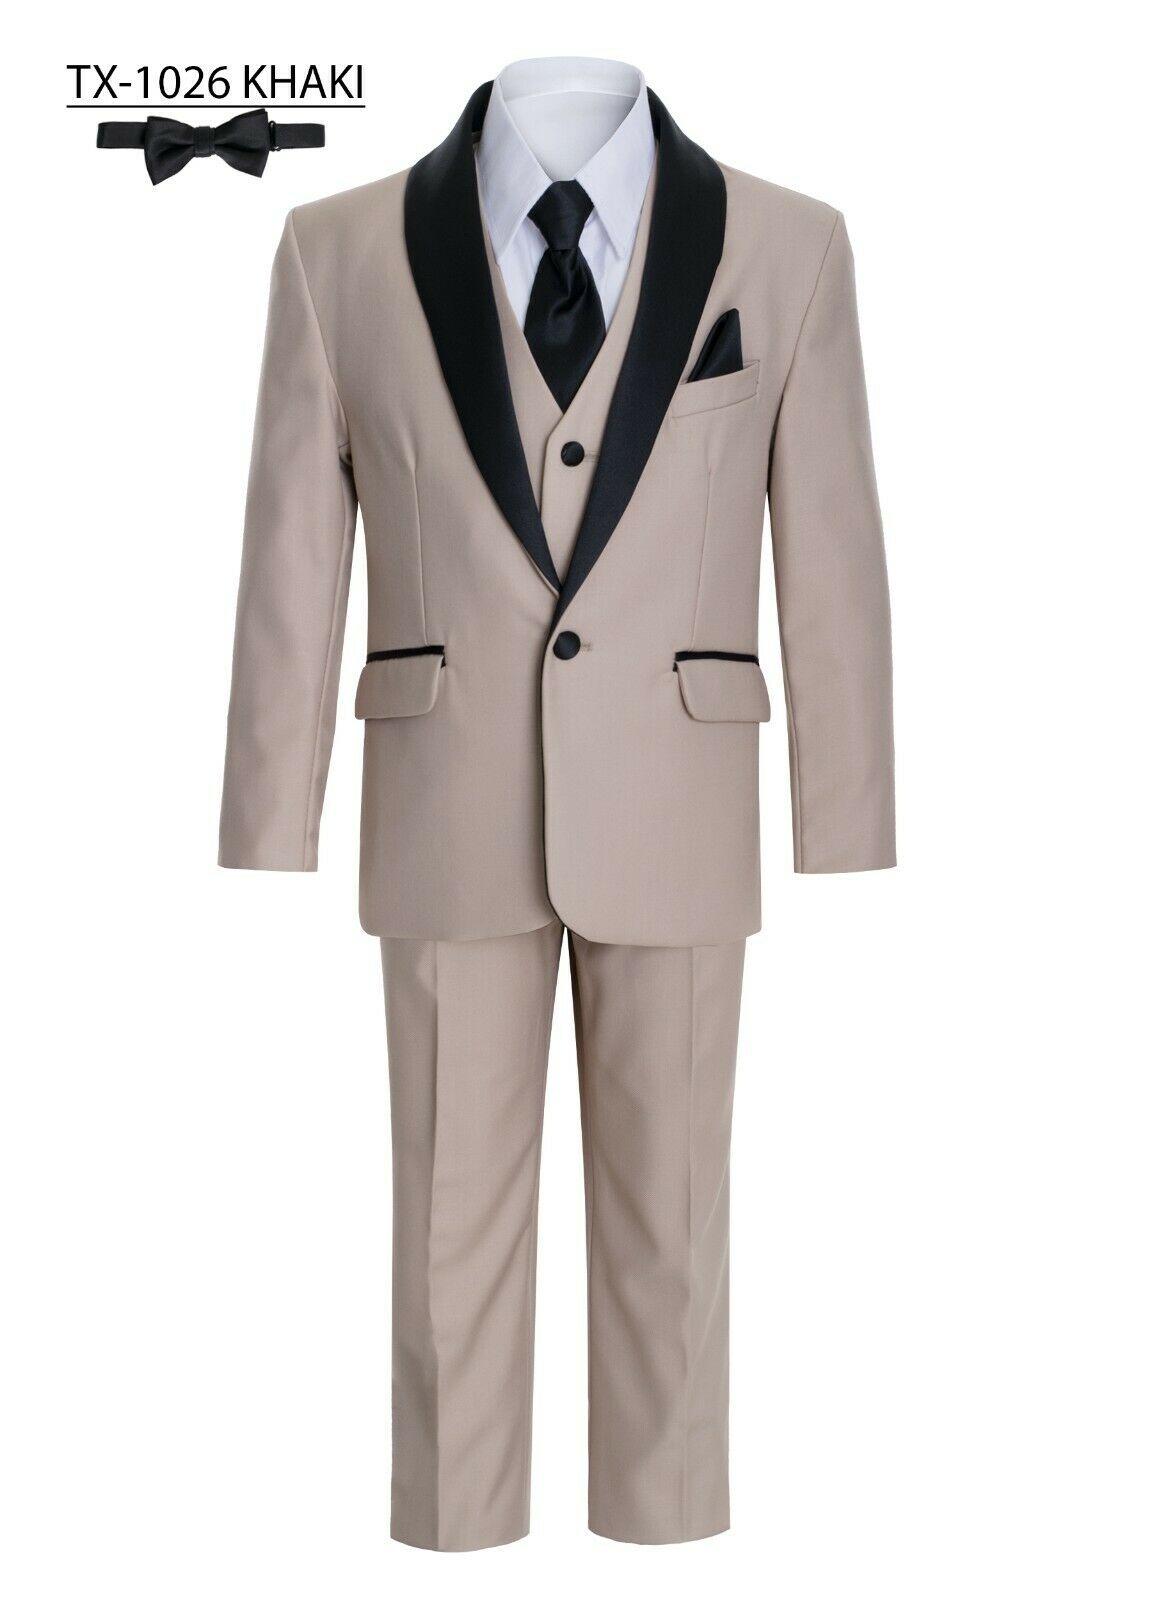 The Shawl Tuxedo Suit, adorned in vibrant colors, a symbol of confidence and charm for a boy.